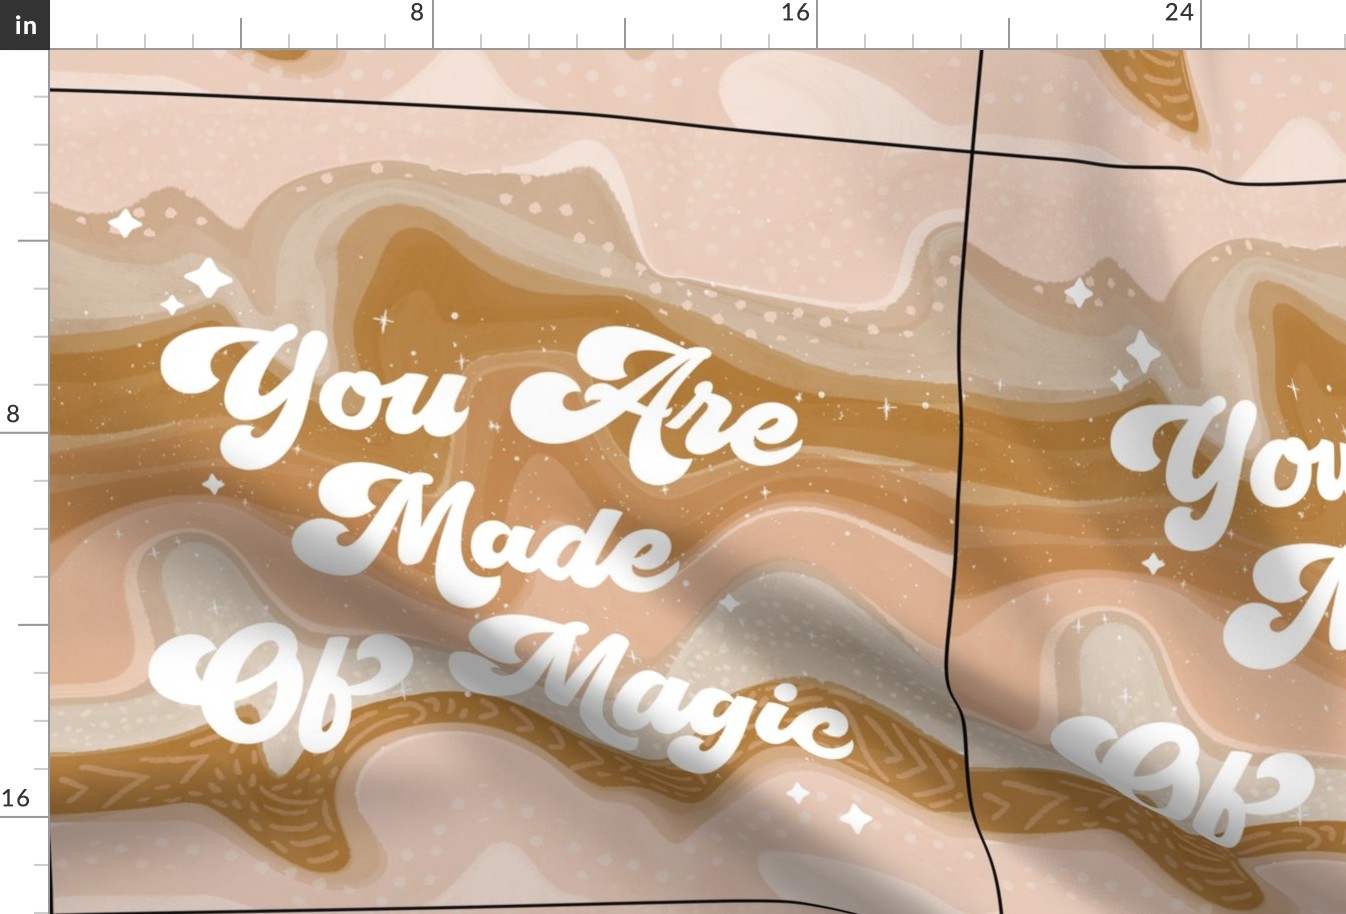 6 loveys: you are made of magic blush and gold